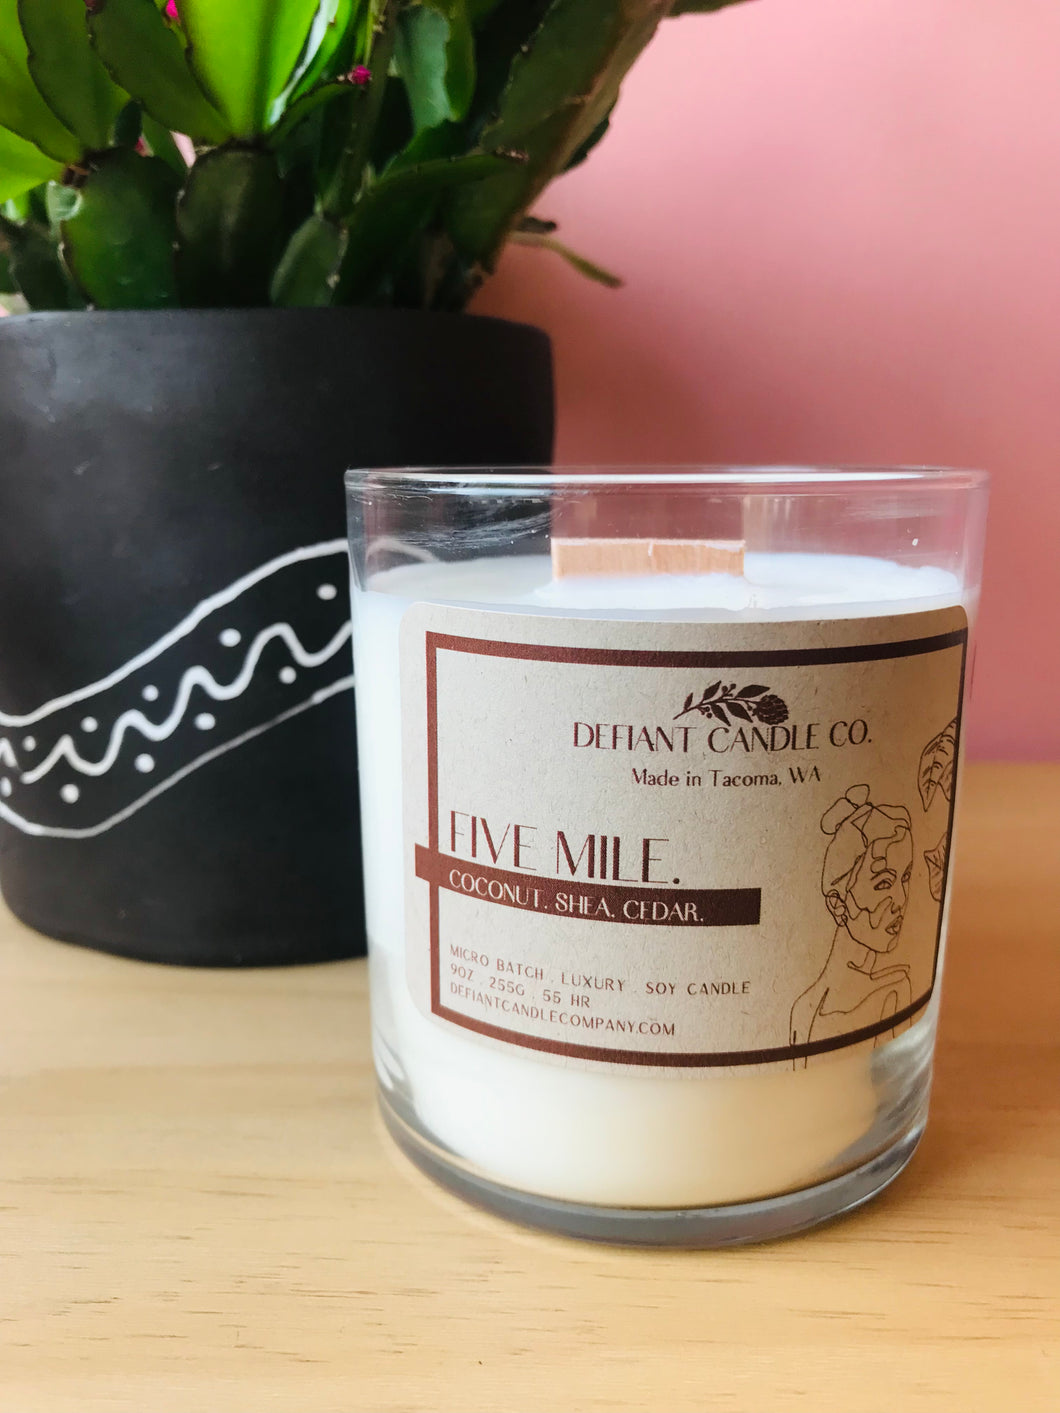 Luxury Soy Candle: Five Mile